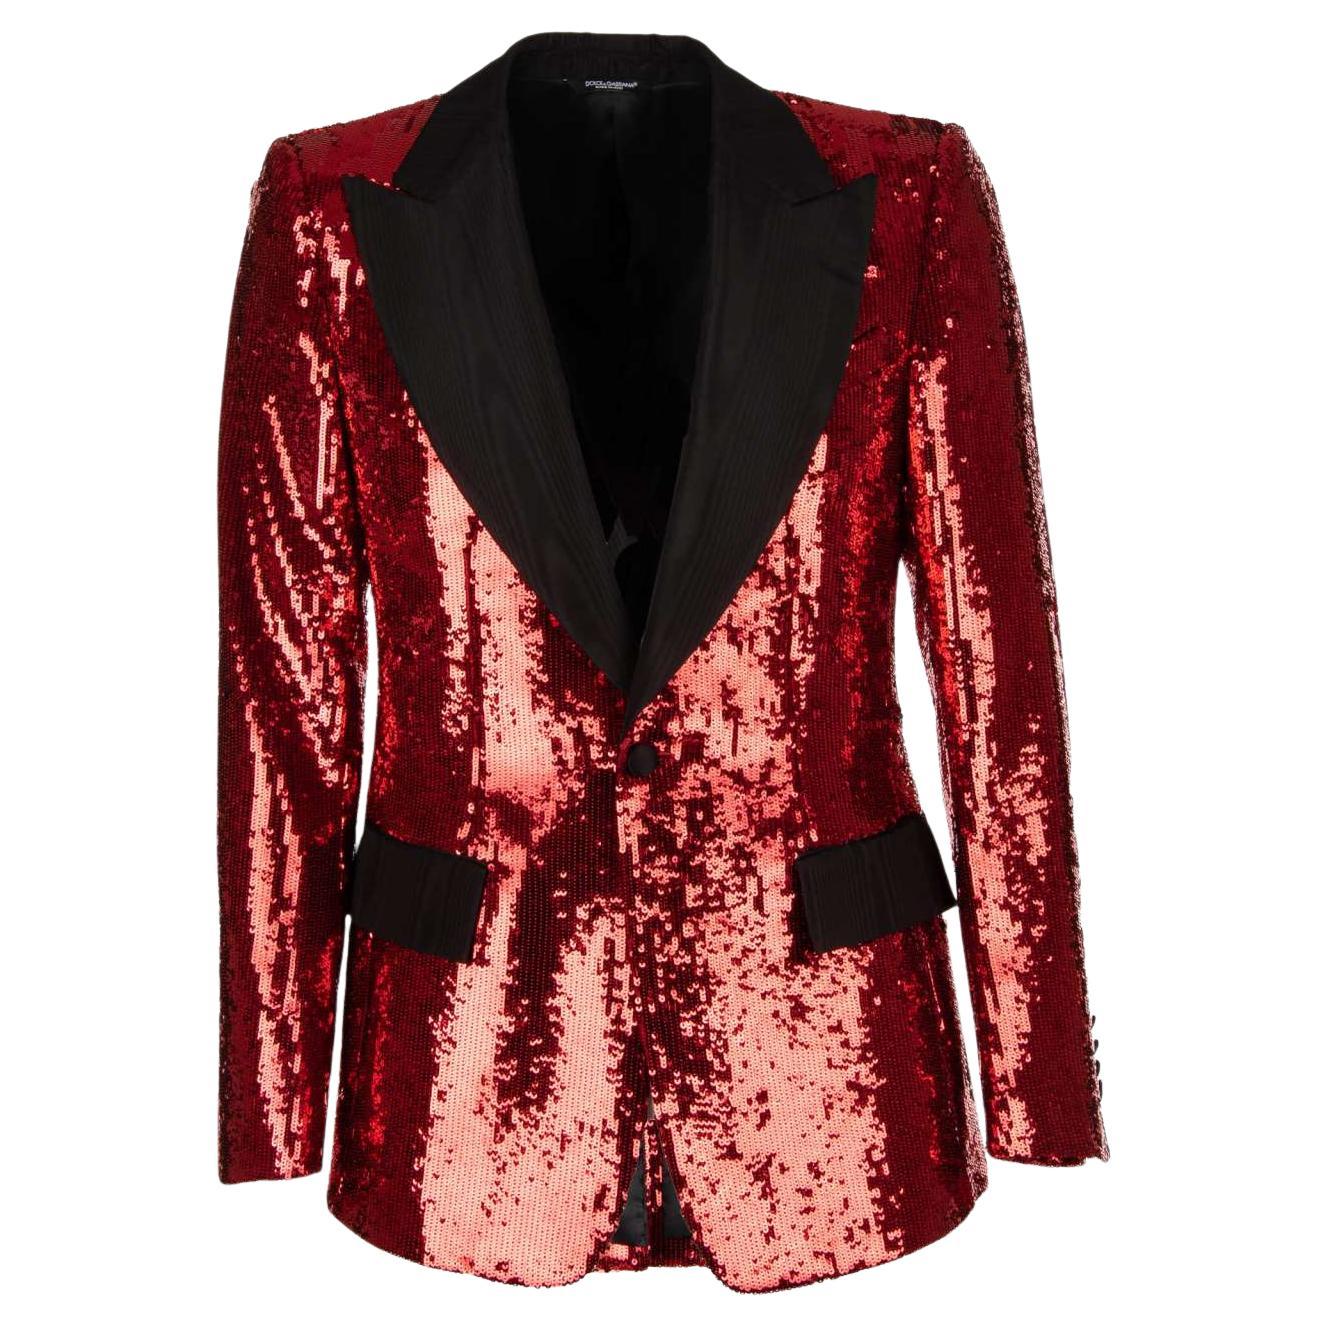 Dolce & Gabbana - Sequined Tuxedo Blazer with Moire Lapel Red Black 50 For Sale